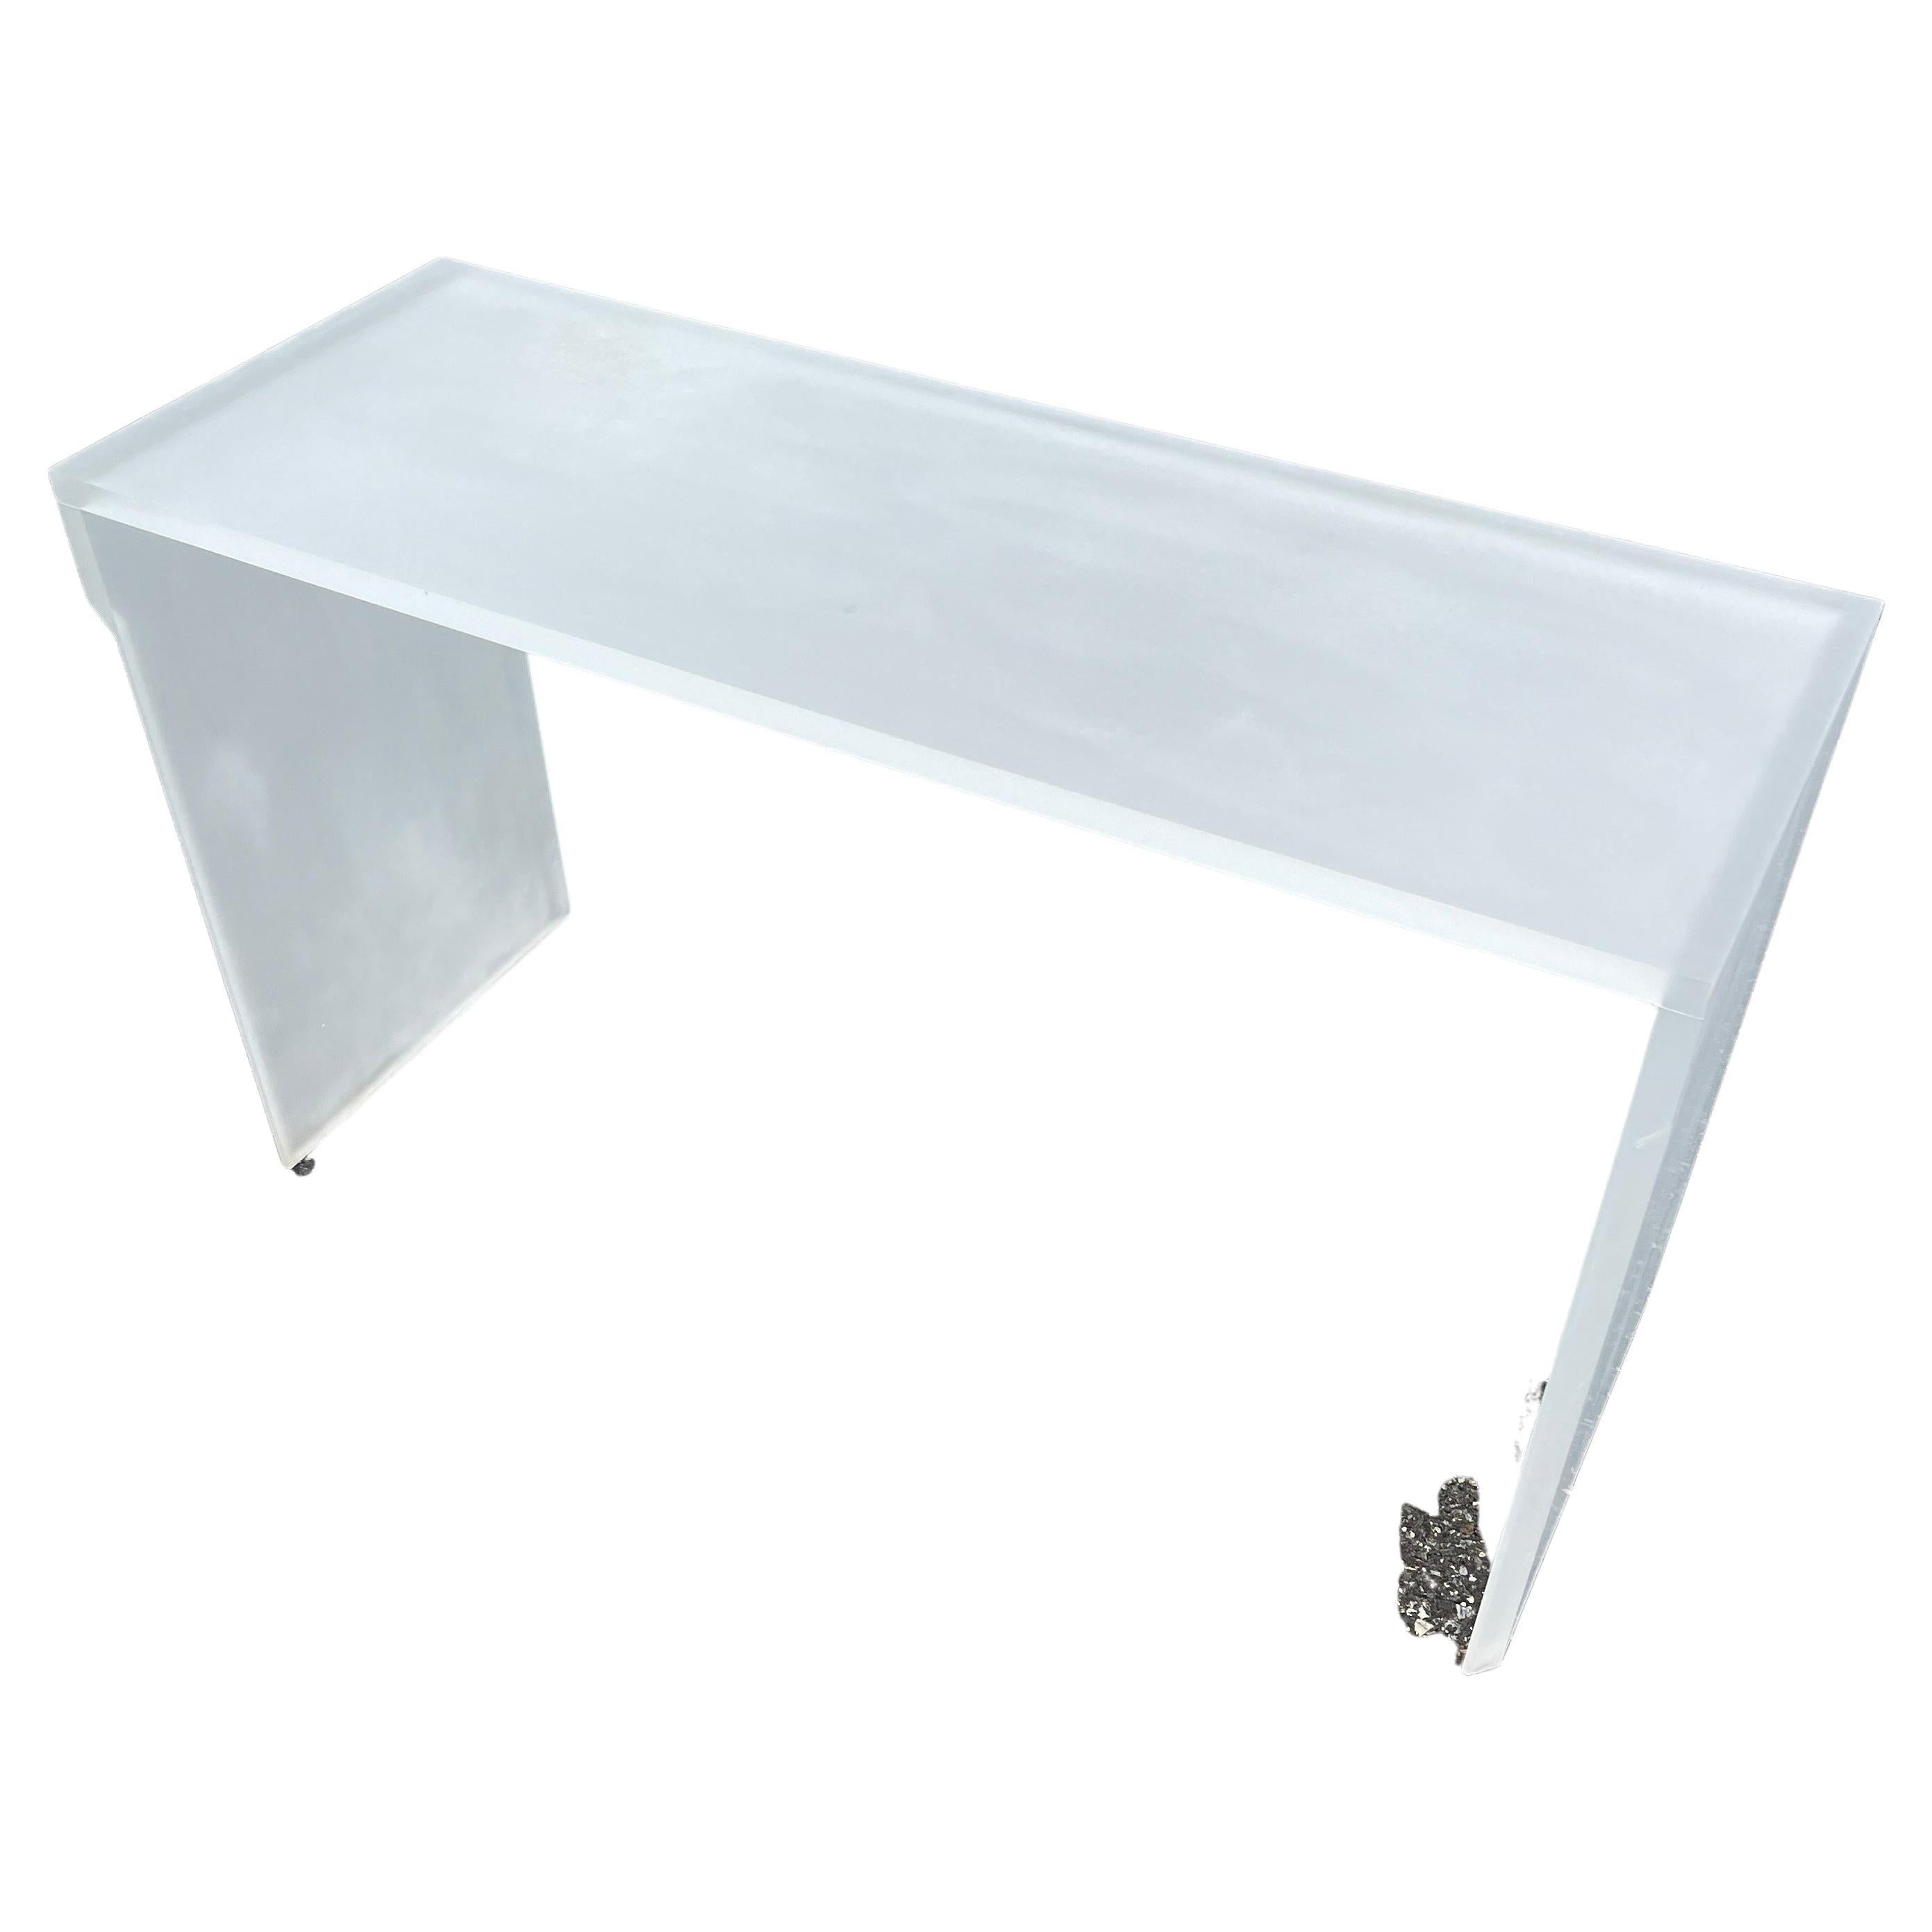 20th Century Italian Mid-Century Modern Frosted Lucite Console, 1970's For Sale